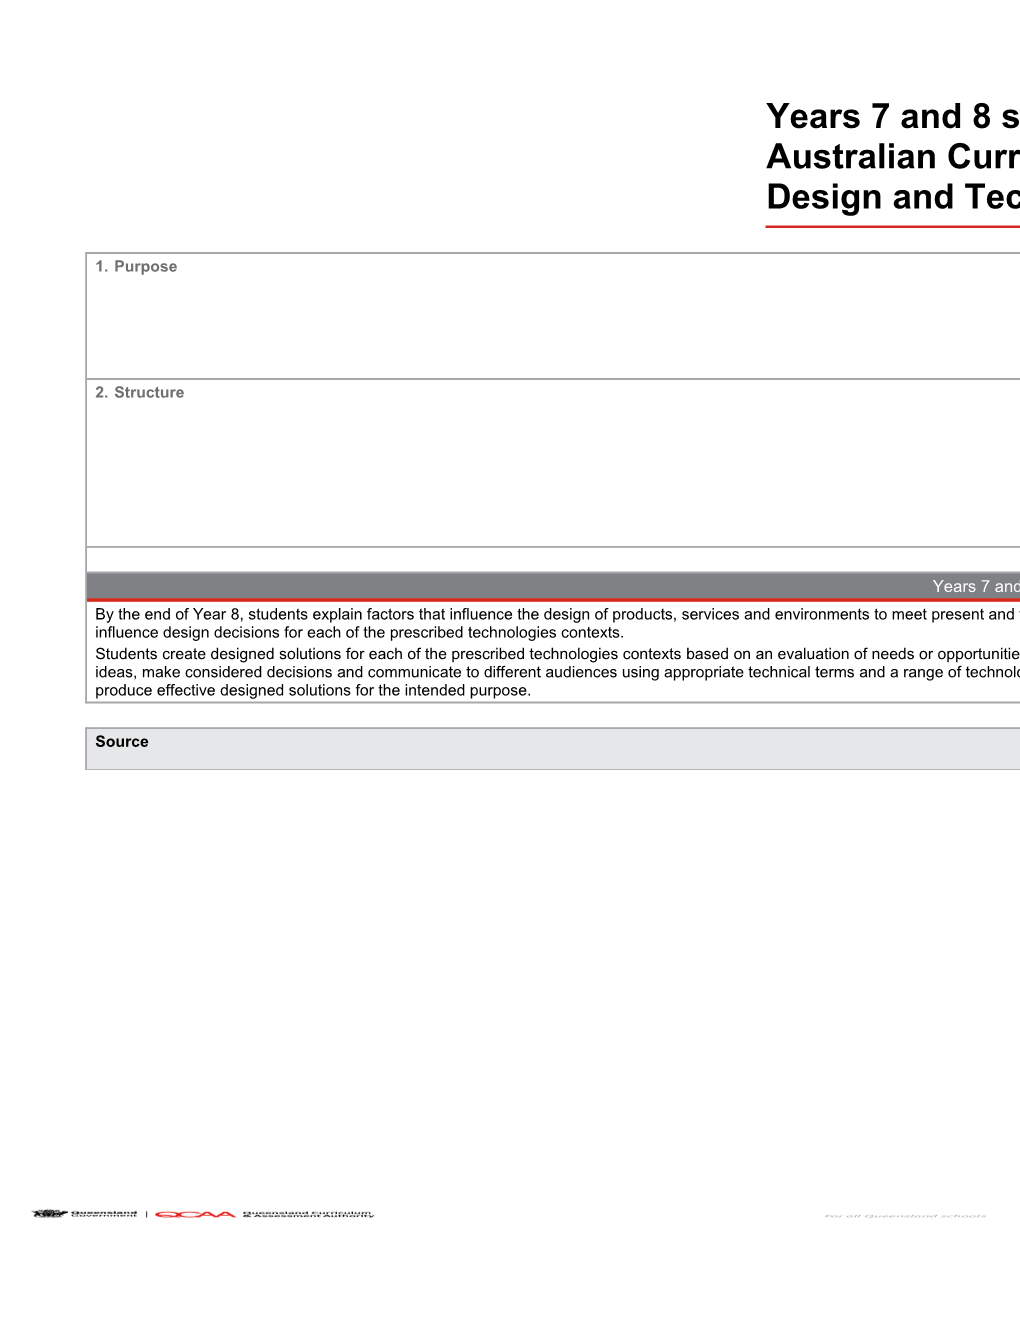 Years 7 and 8 Standard Elaborations Australian Curriculum: Design and Technologies